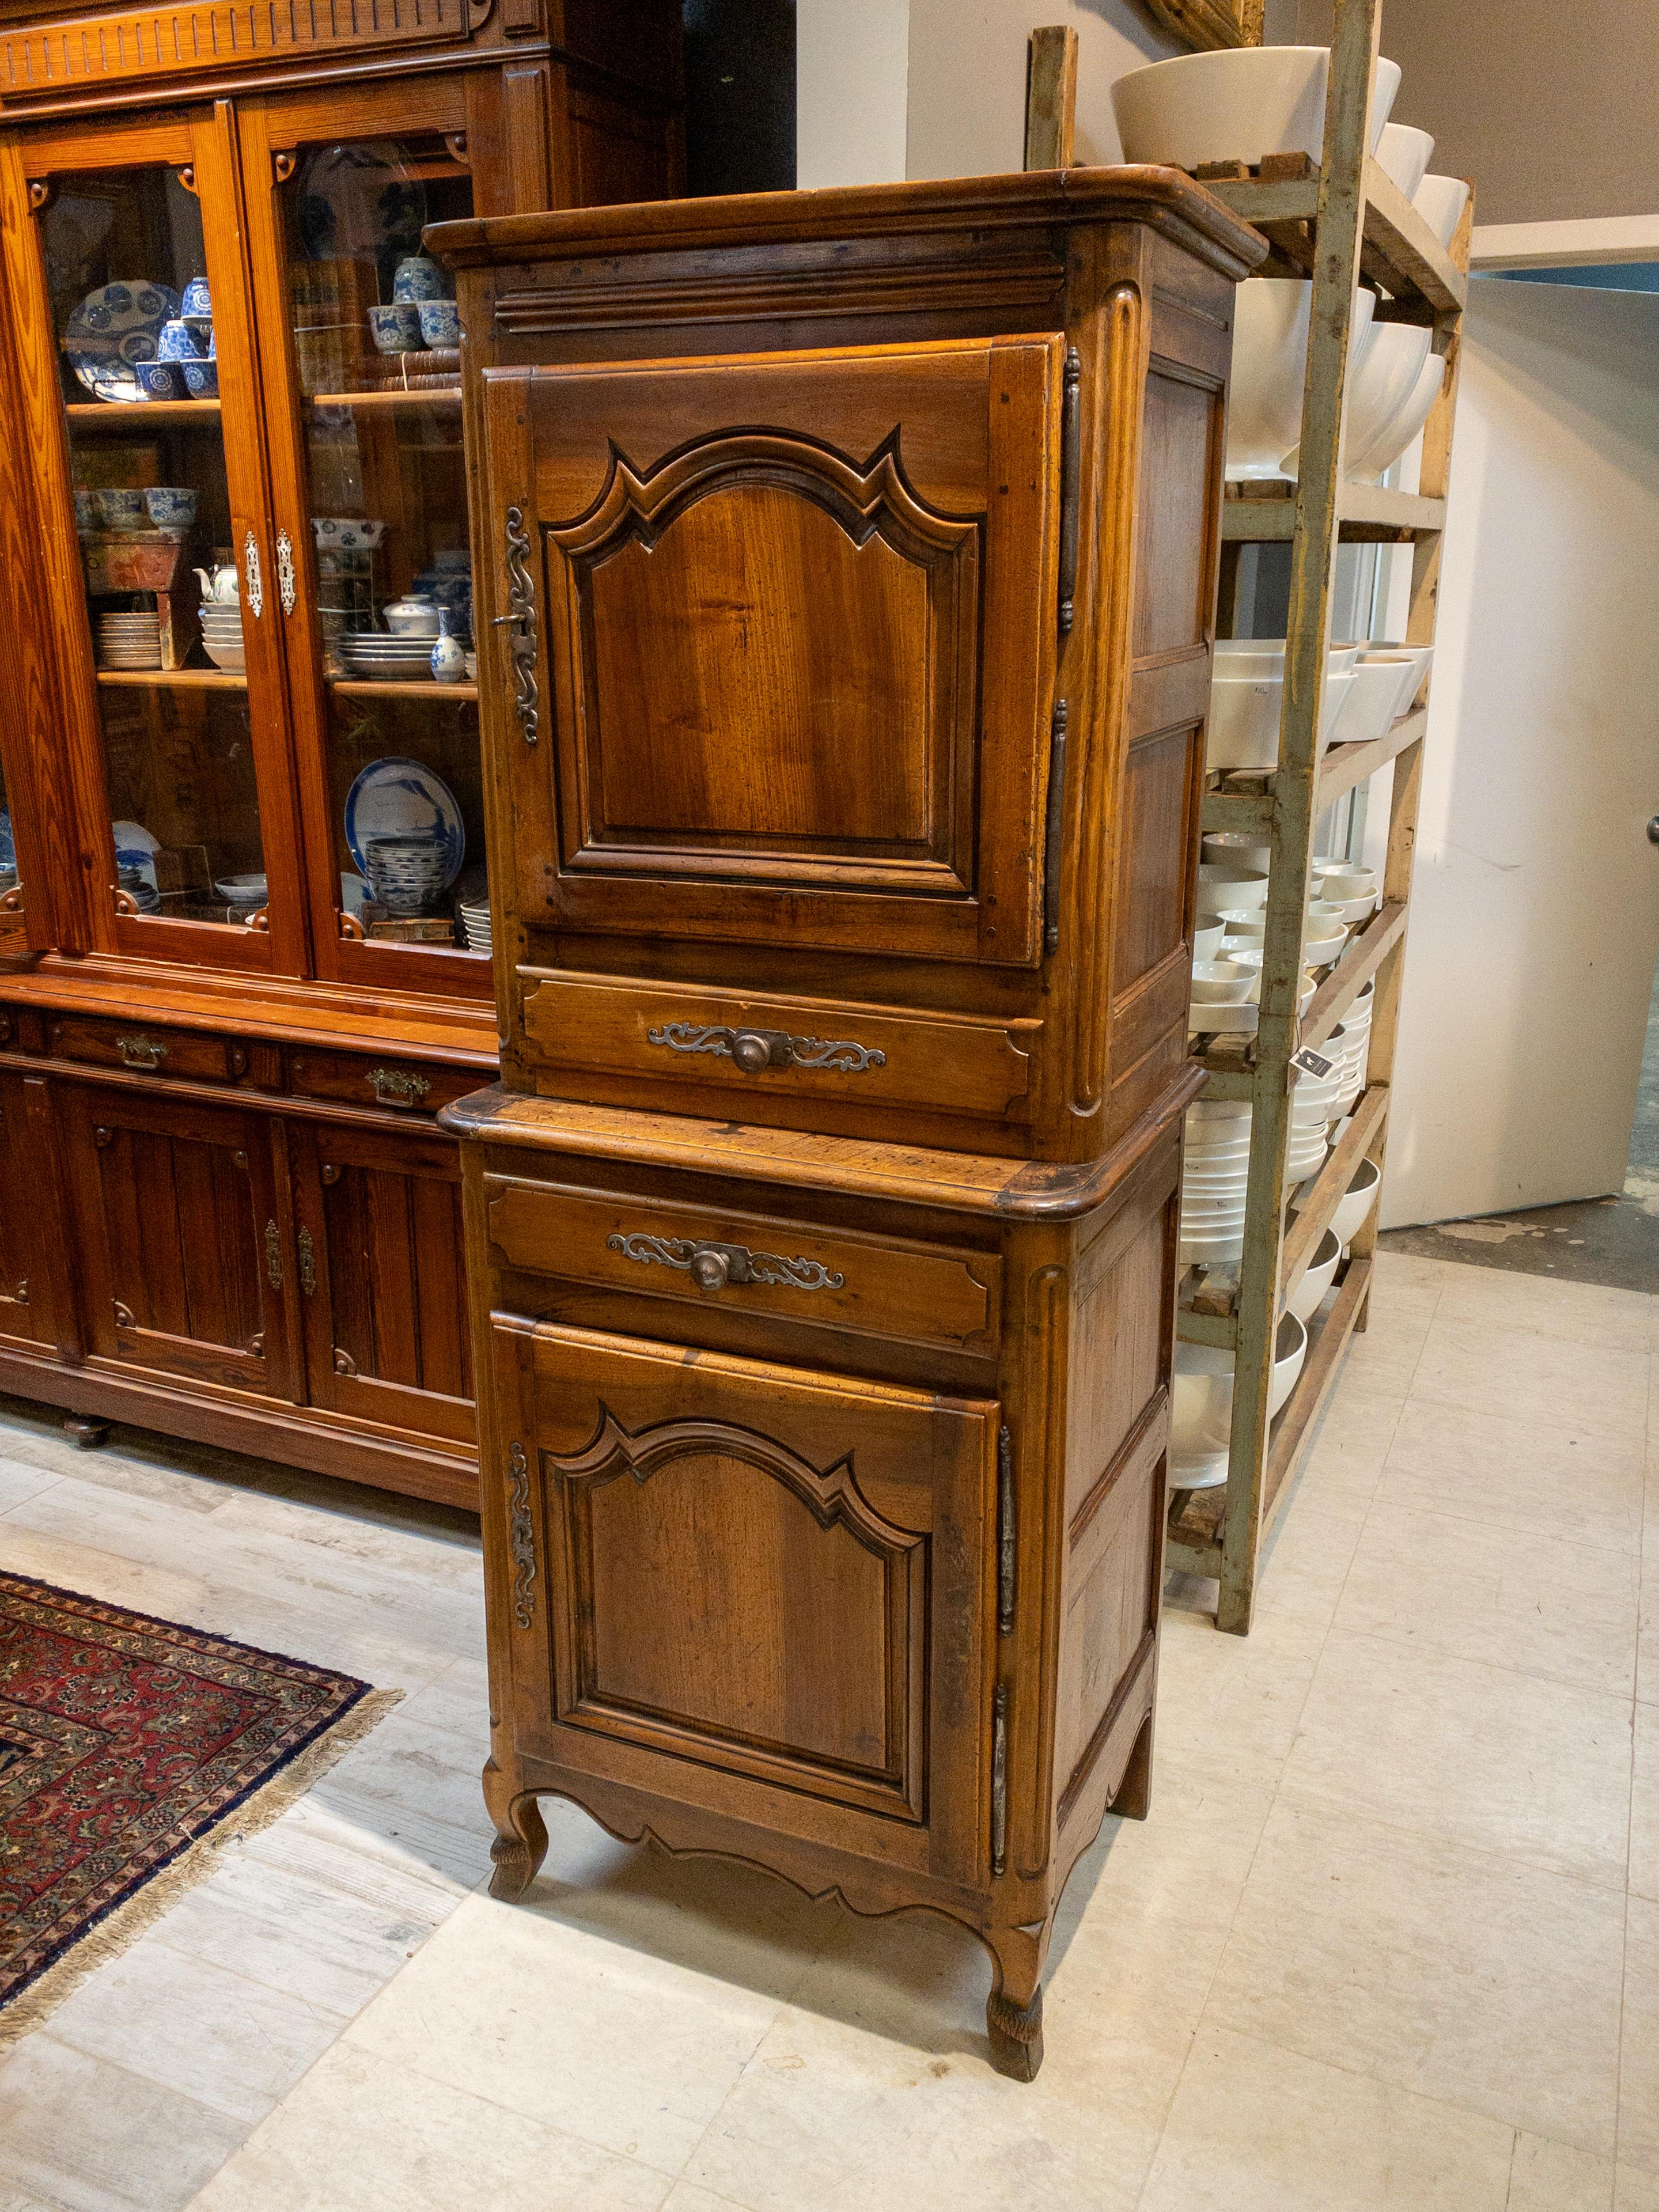 Crafted in the opulent style of 18th Century France, this exquisite Fruitwood Cabinet is a triumph of artistry and functionality. The upper compartment boasts a lockable door adorned with detailed carvings, secured by an ornate key. Inside, a